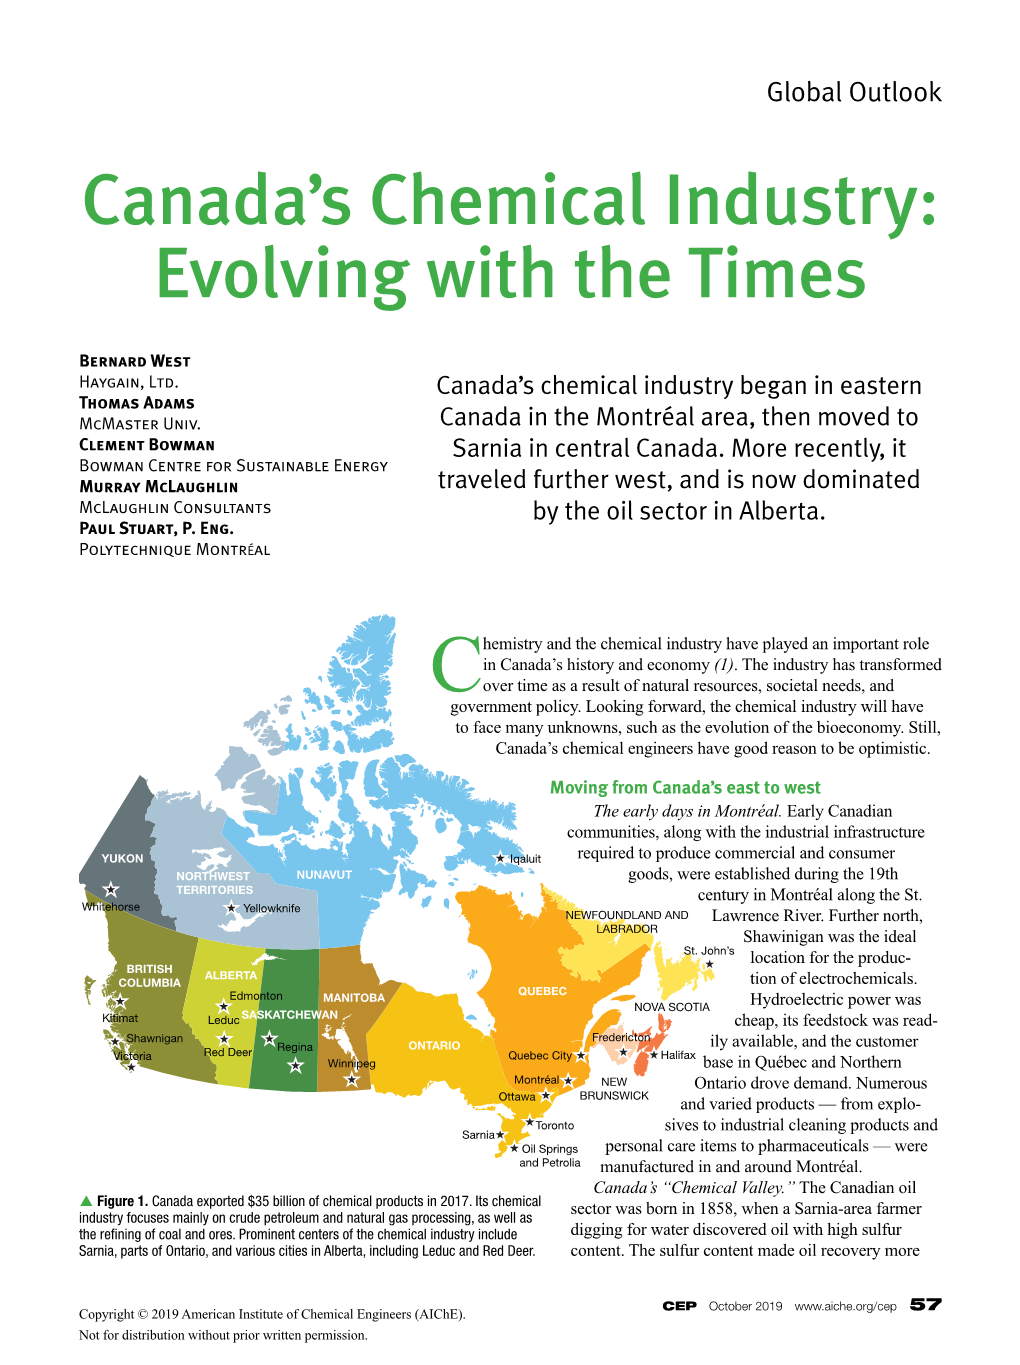 Canada's Chemical Industry: Evolving with the Times